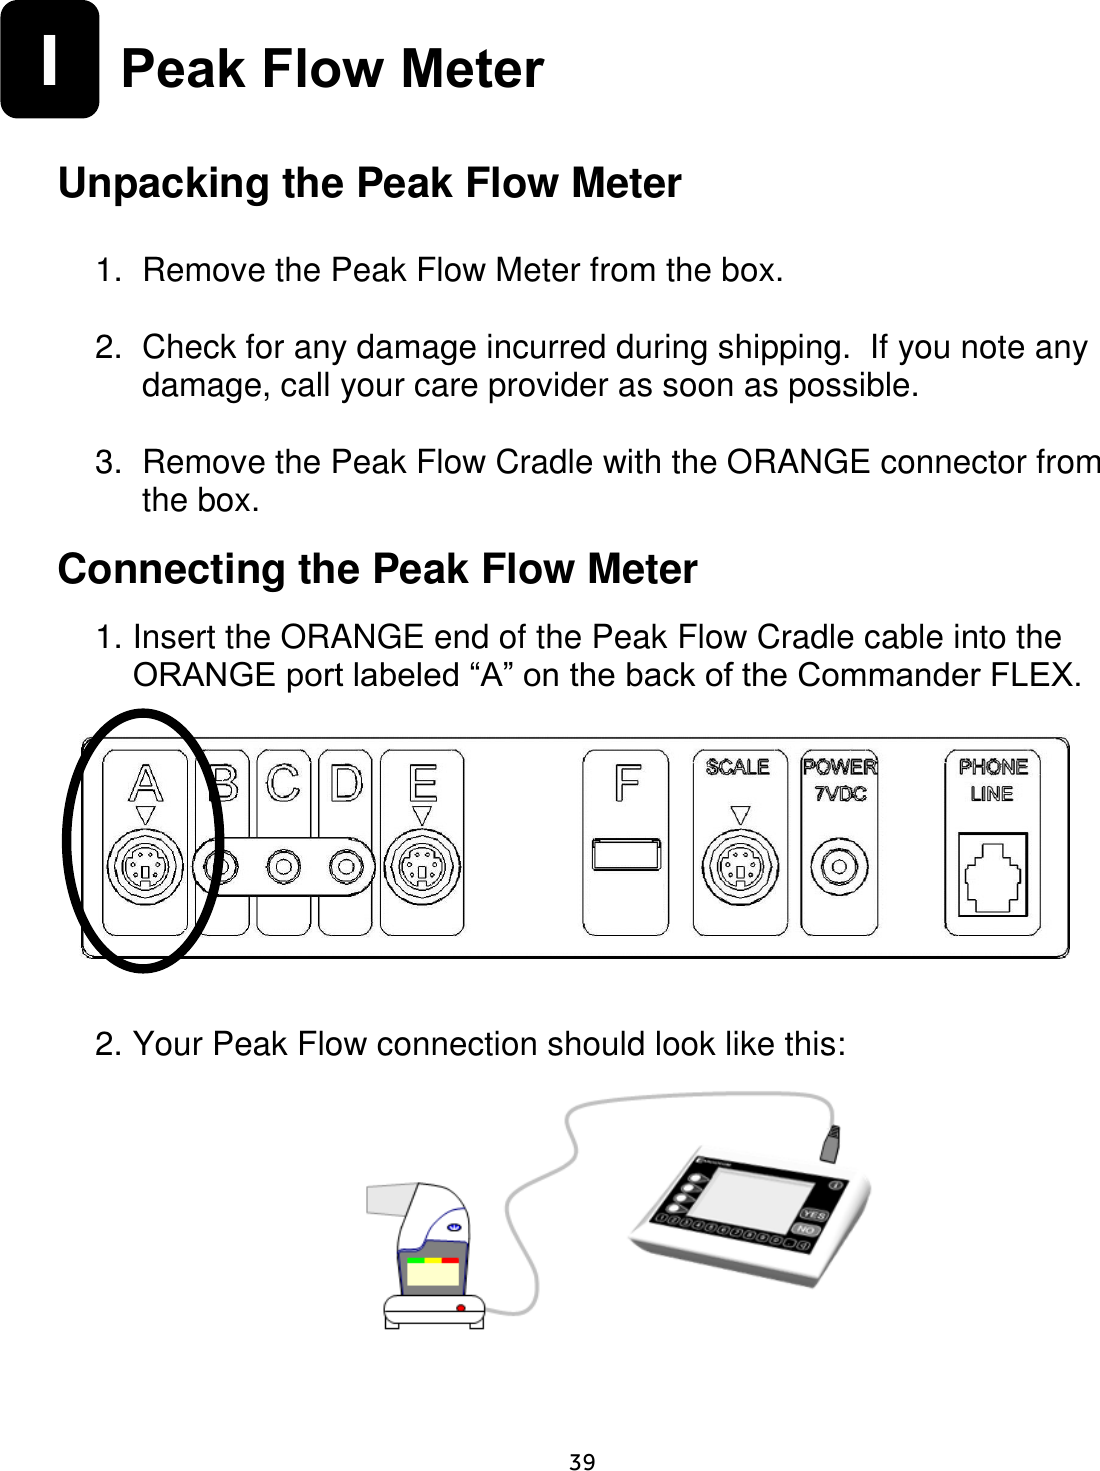     39  I Peak Flow Meter   Unpacking the Peak Flow Meter  1.  Remove the Peak Flow Meter from the box.    2.  Check for any damage incurred during shipping.  If you note any damage, call your care provider as soon as possible.    3.  Remove the Peak Flow Cradle with the ORANGE connector from the box. Connecting the Peak Flow Meter  1. Insert the ORANGE end of the Peak Flow Cradle cable into the ORANGE port labeled “A” on the back of the Commander FLEX.          2. Your Peak Flow connection should look like this:     